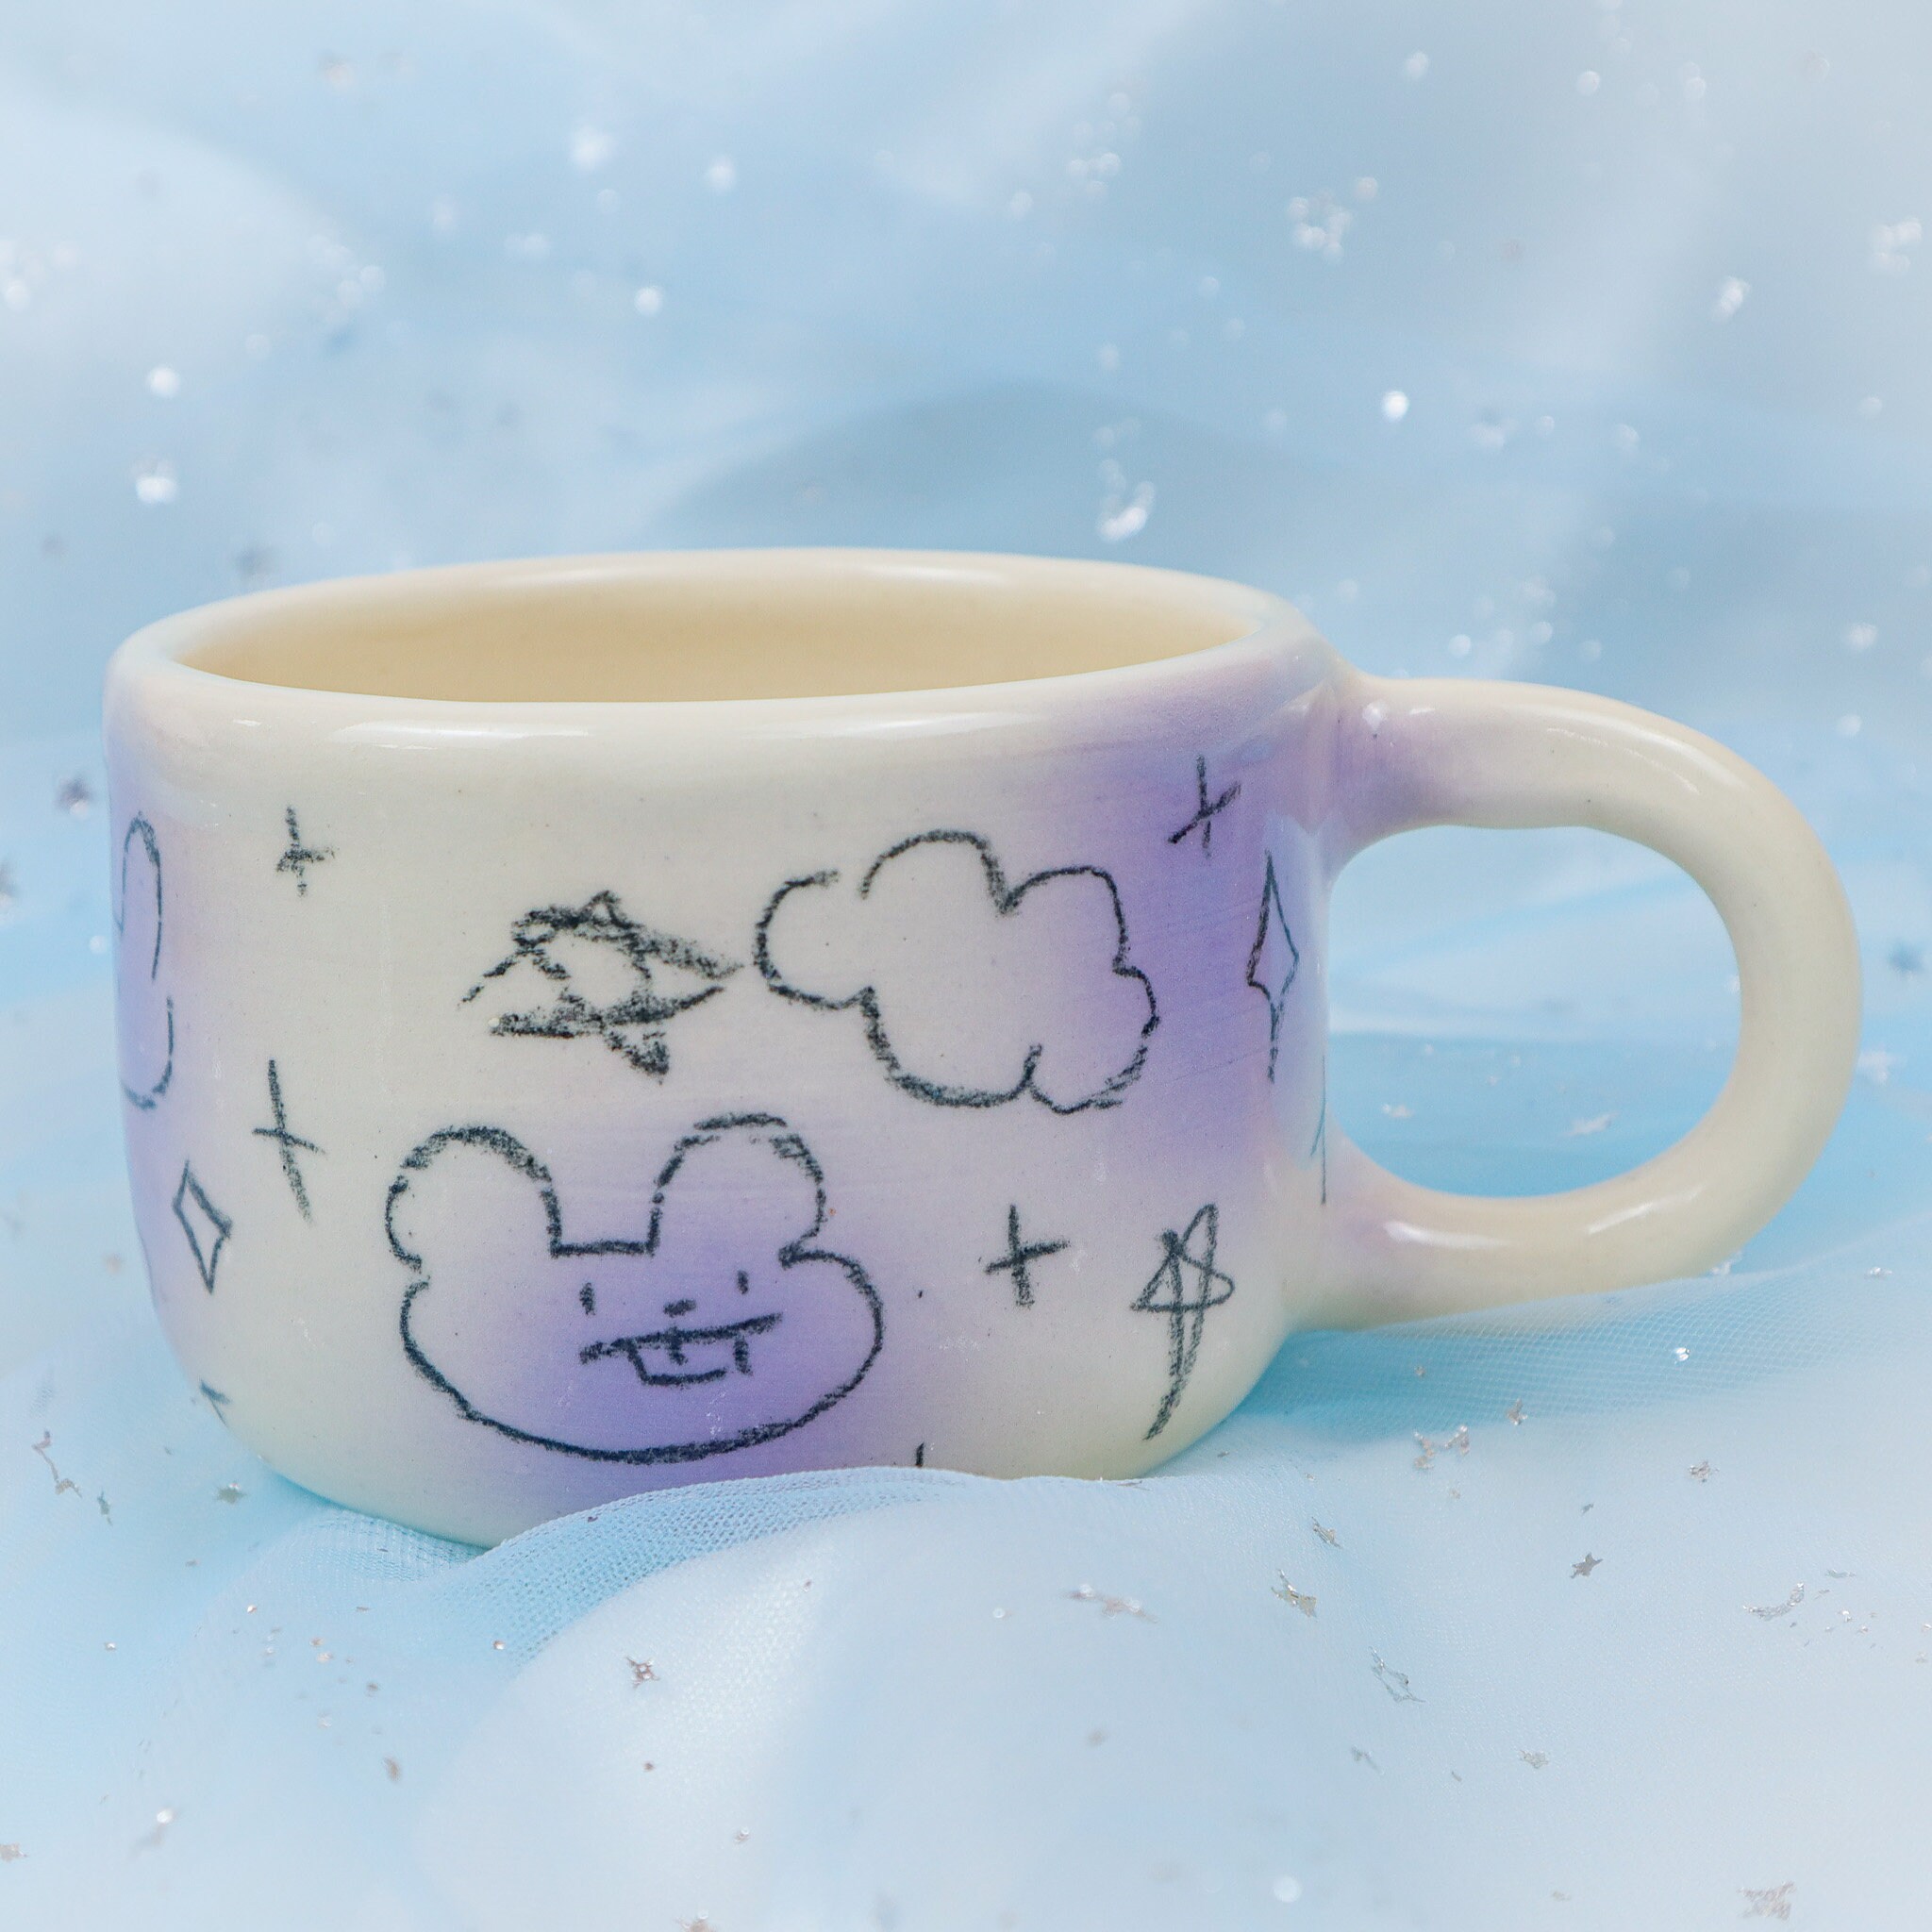 3 trendy cloud mugs that you need in your life. Cute!